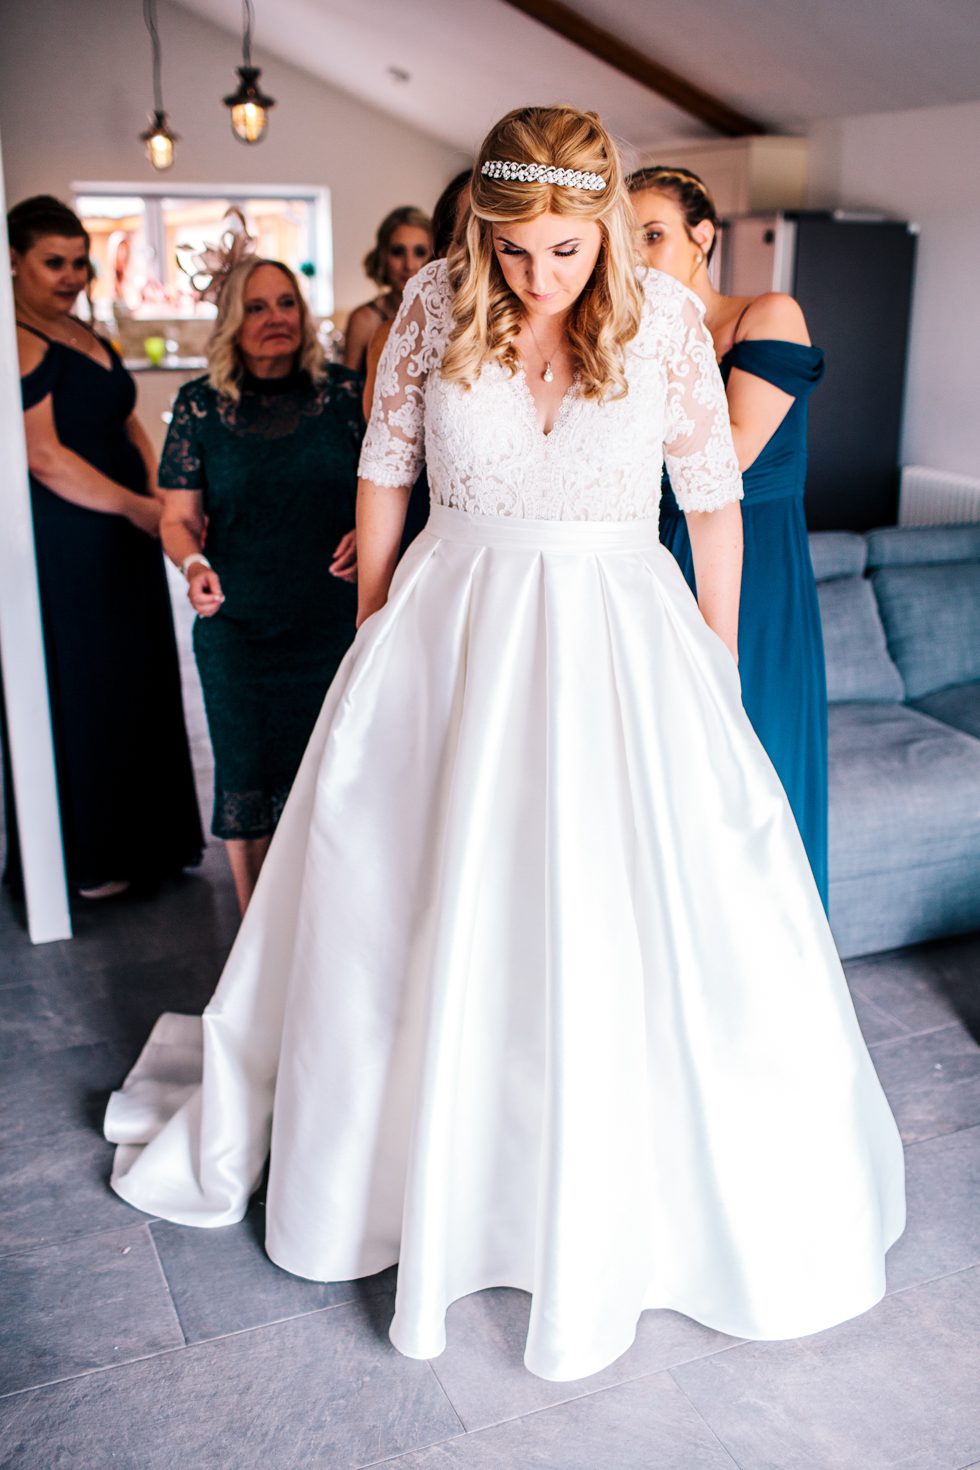 awesome alternative bride getting ready with hands in the pockets of her wedding dress